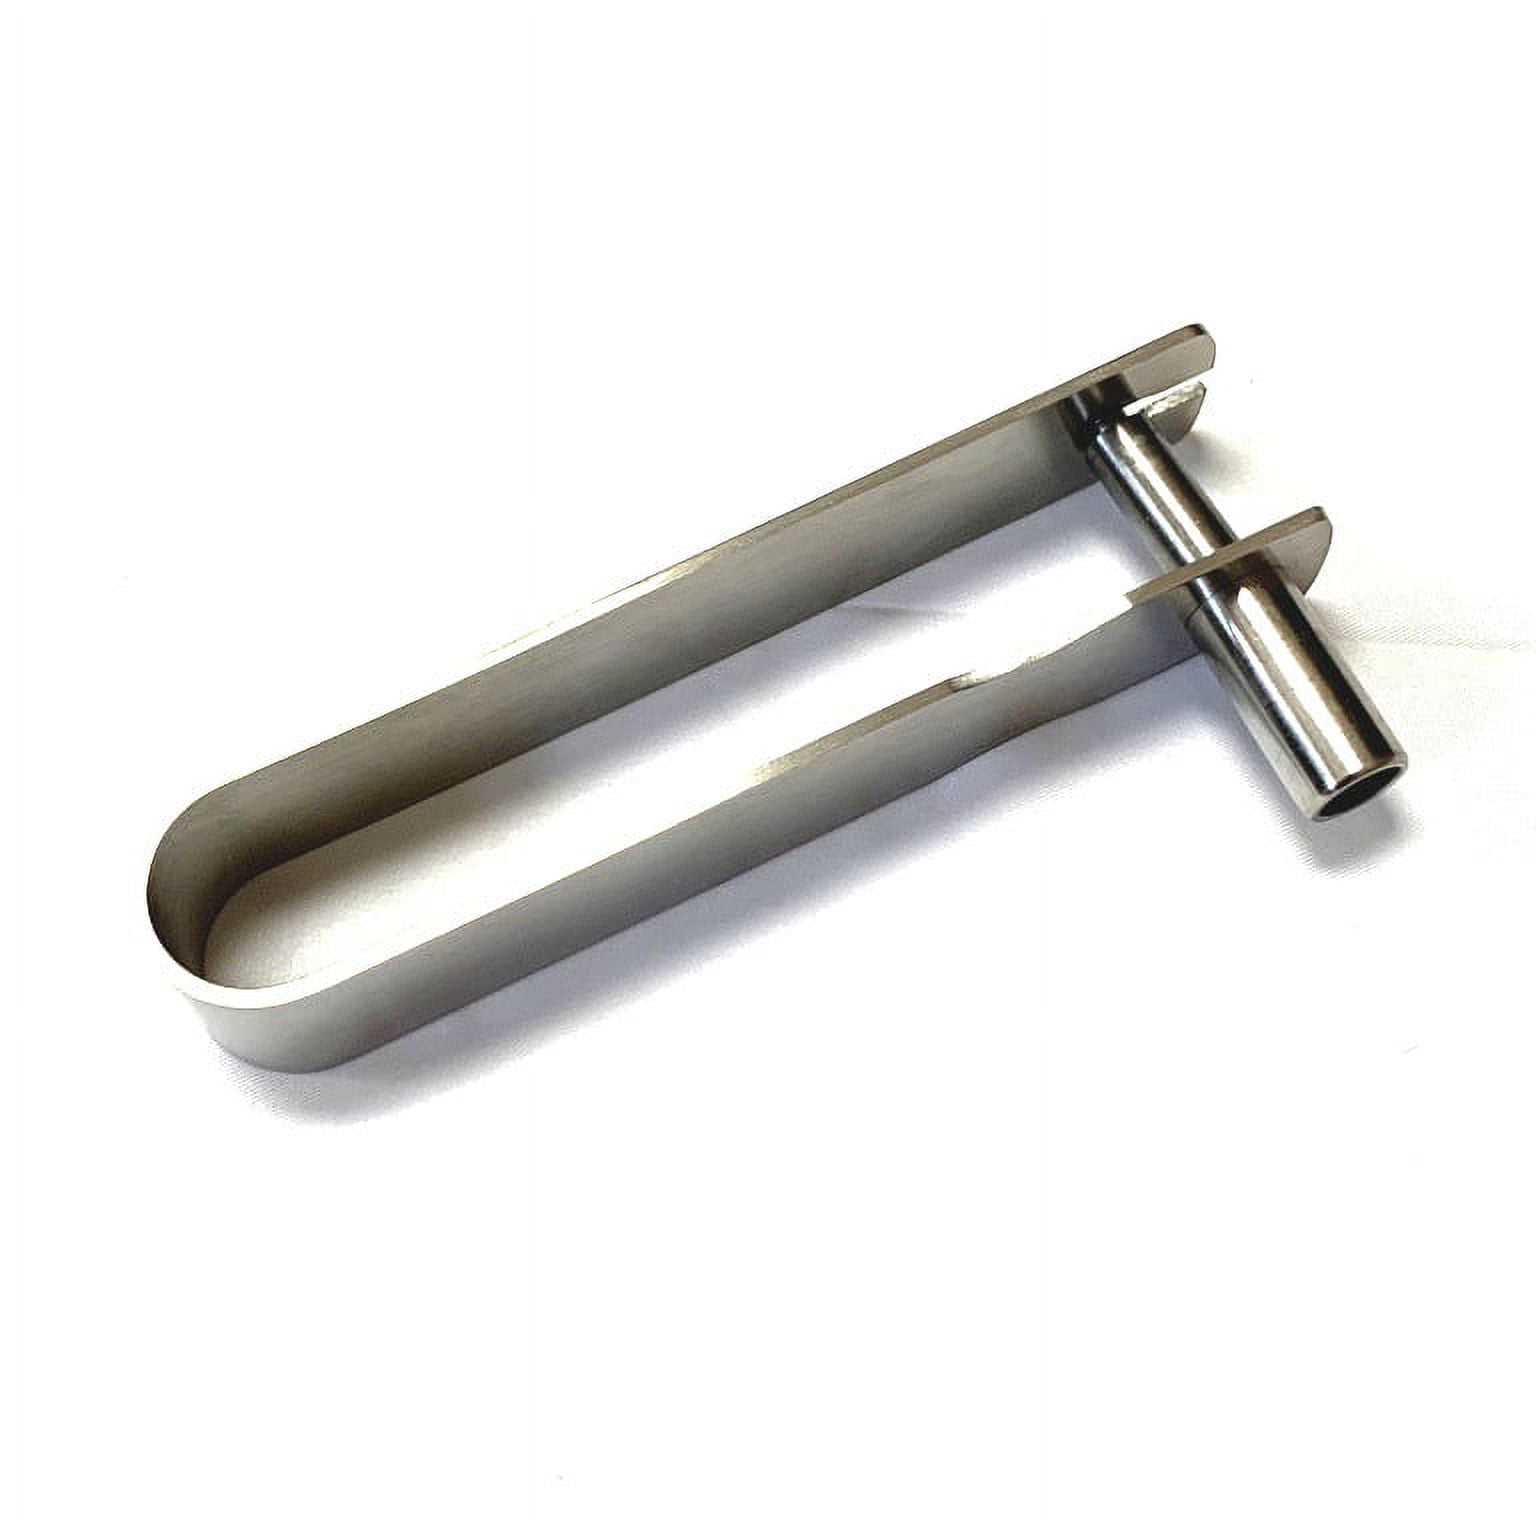 BarSupplies.com BarConic Stainless Steel Olive Stuffer